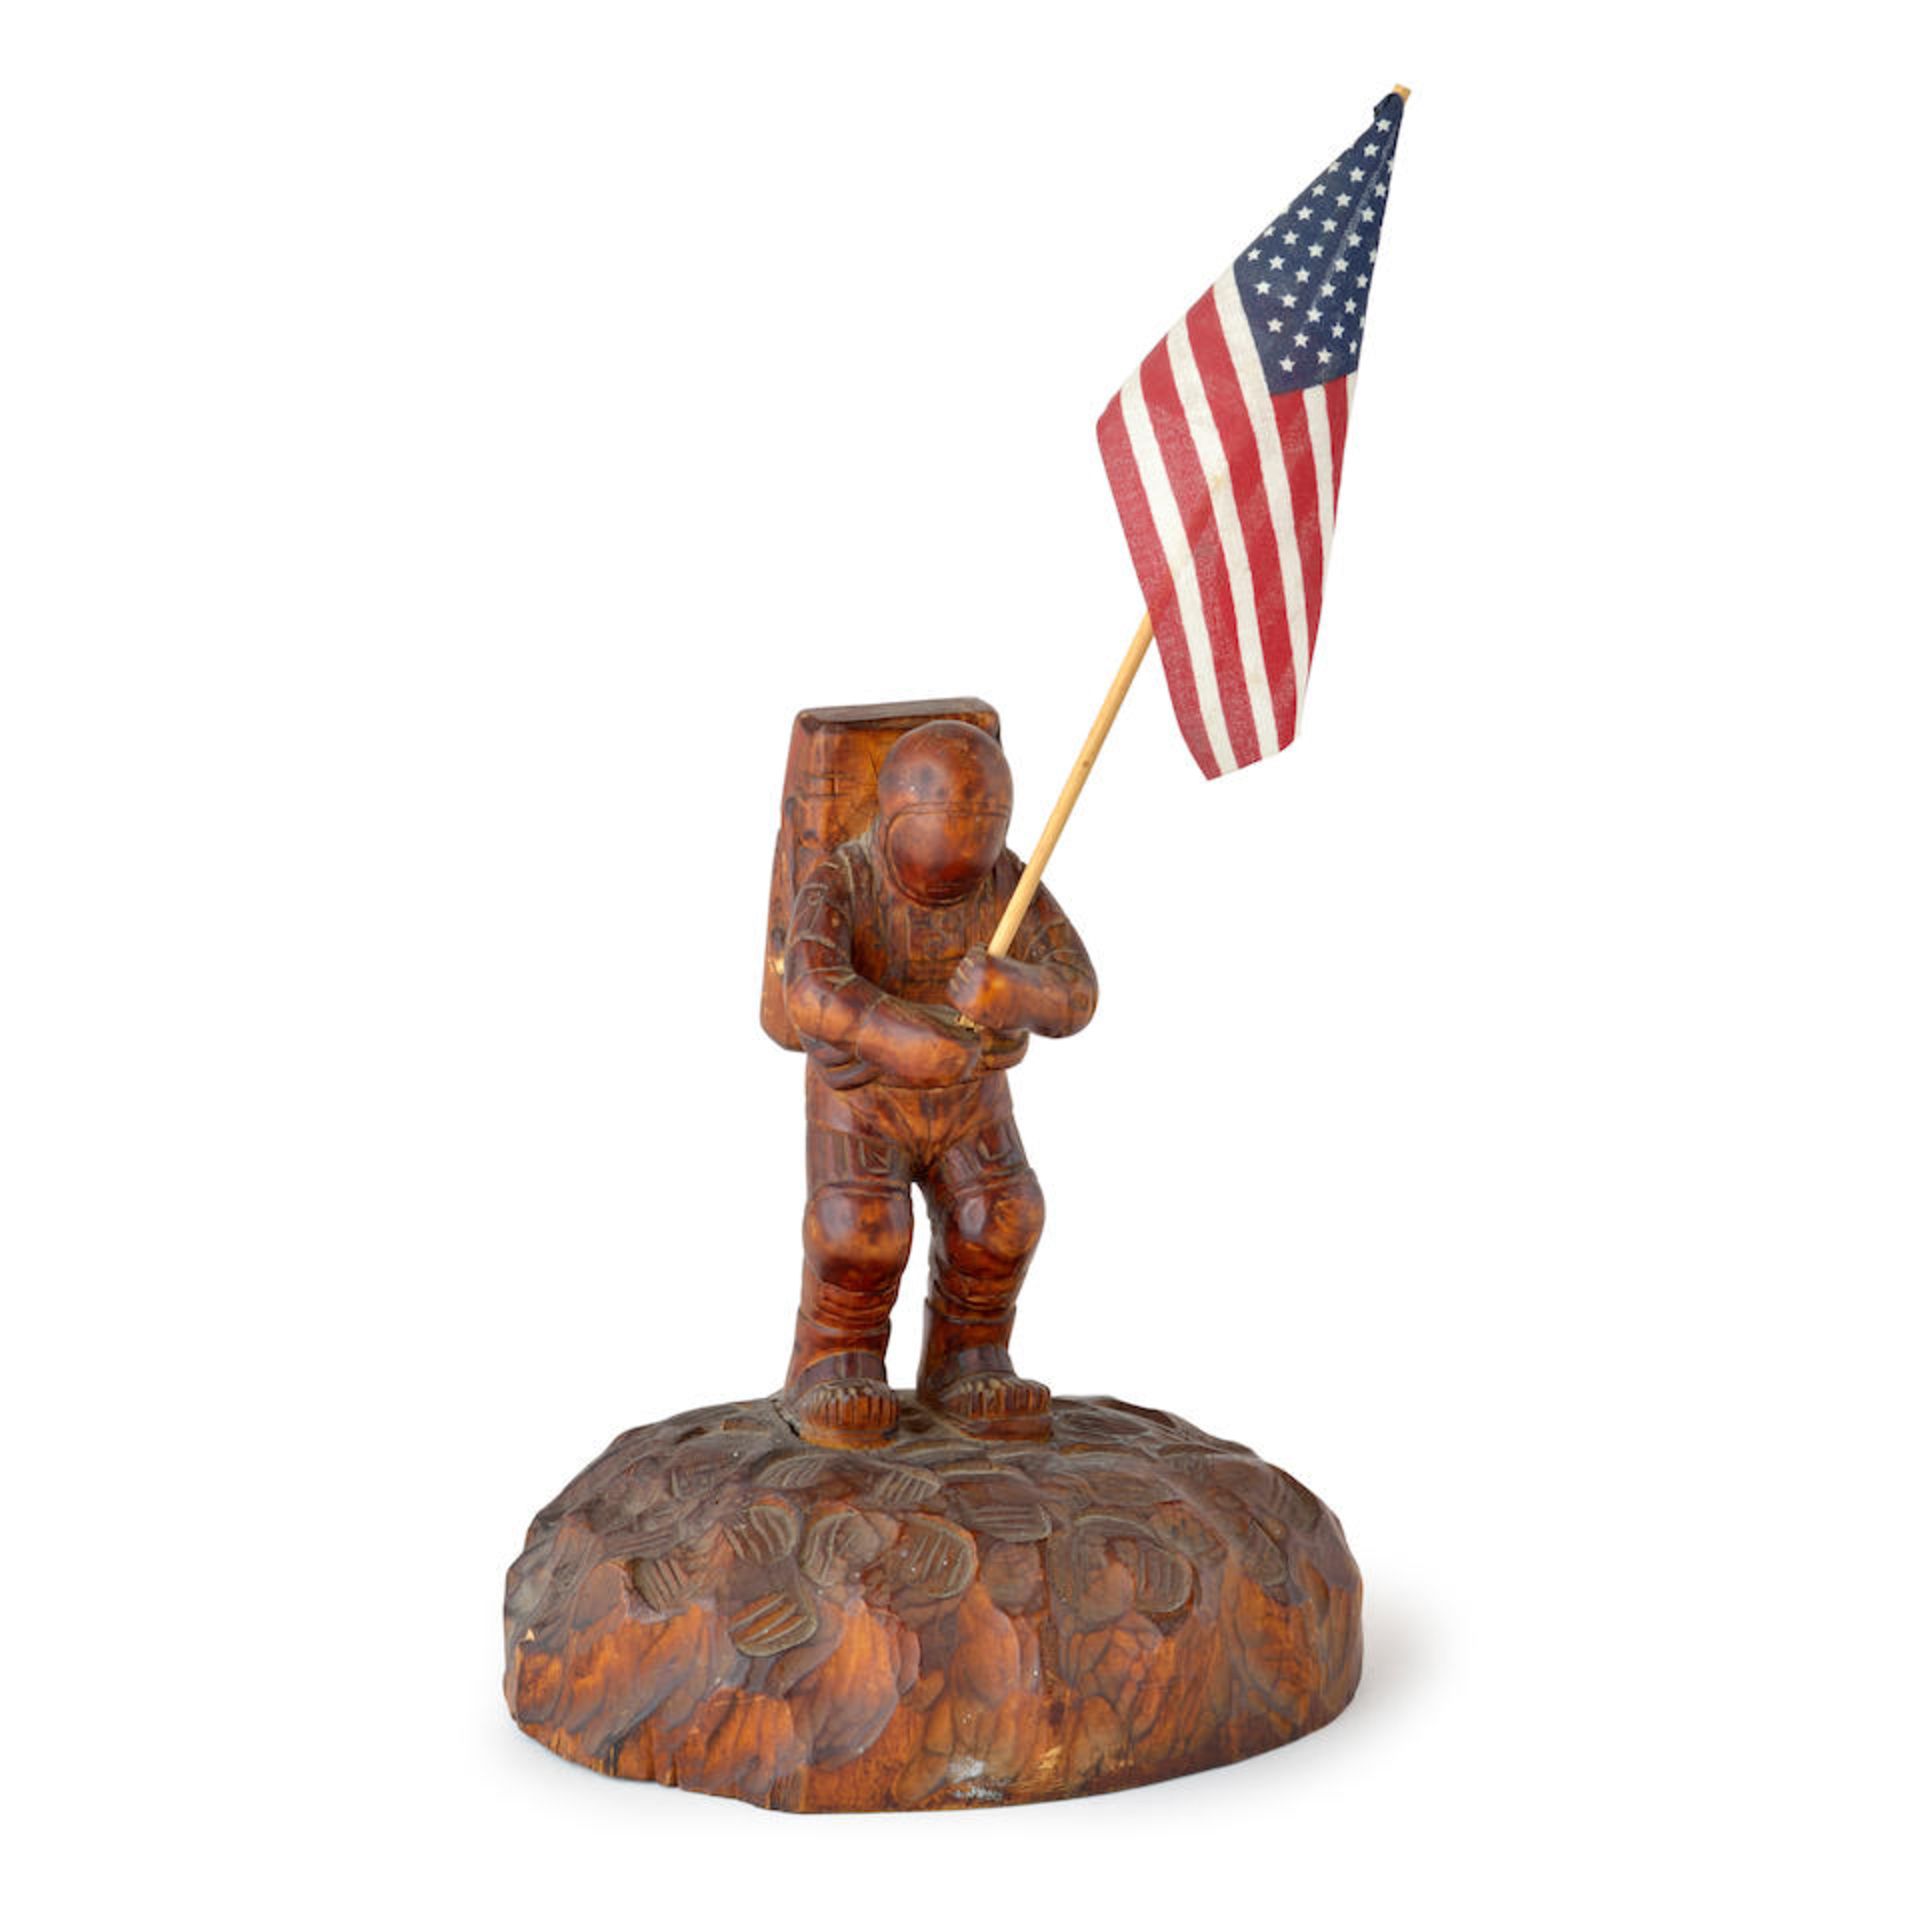 Carved Figure of Neil Armstrong on the Moon, United States, c. 1970.